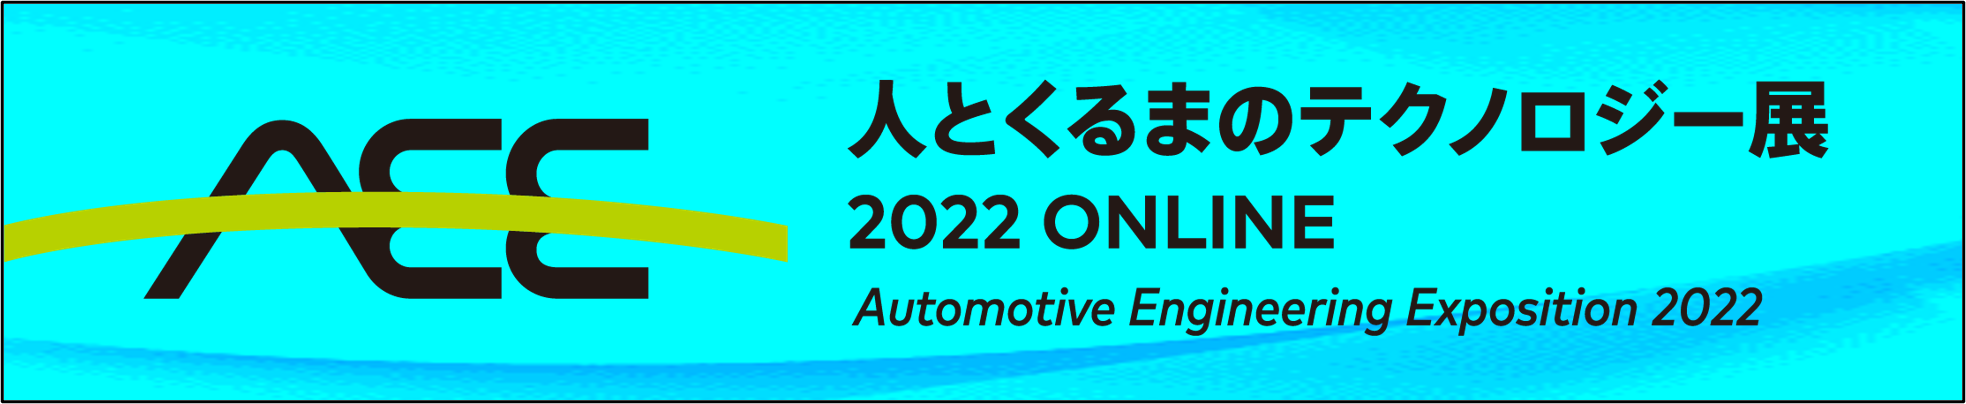 Automotive Engineering Exposition 2022　We will have an on-line exhibition again this year.